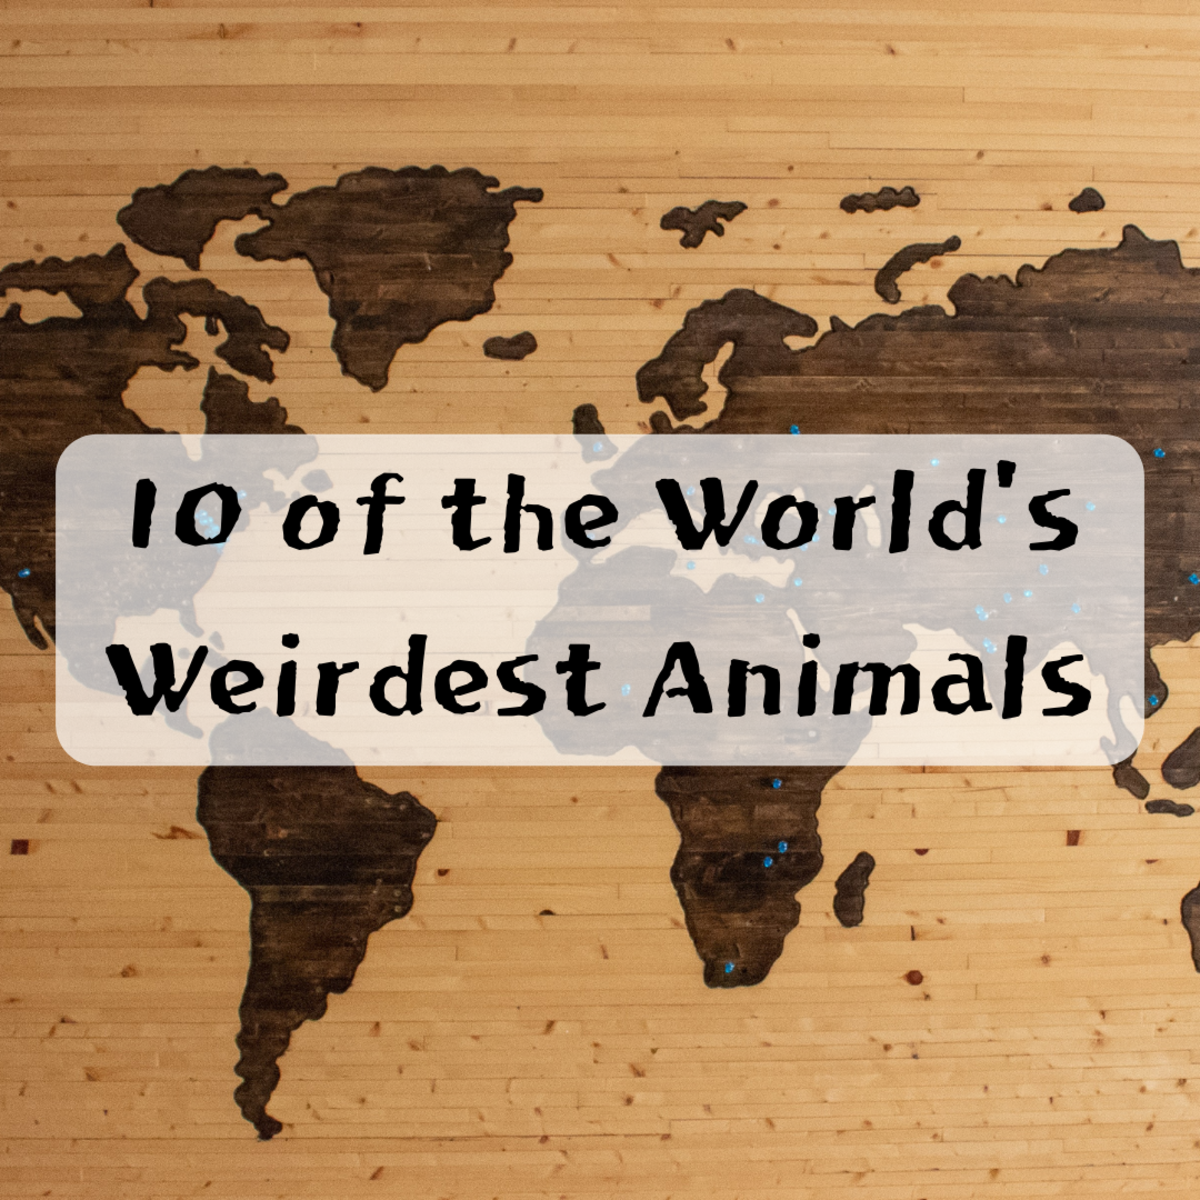 In this article, you'll learn about 10 of the world's weirdest animals. These creatures are as odd-looking as they are awe-inspiring. Read on to learn about some creatures you never thought existed!